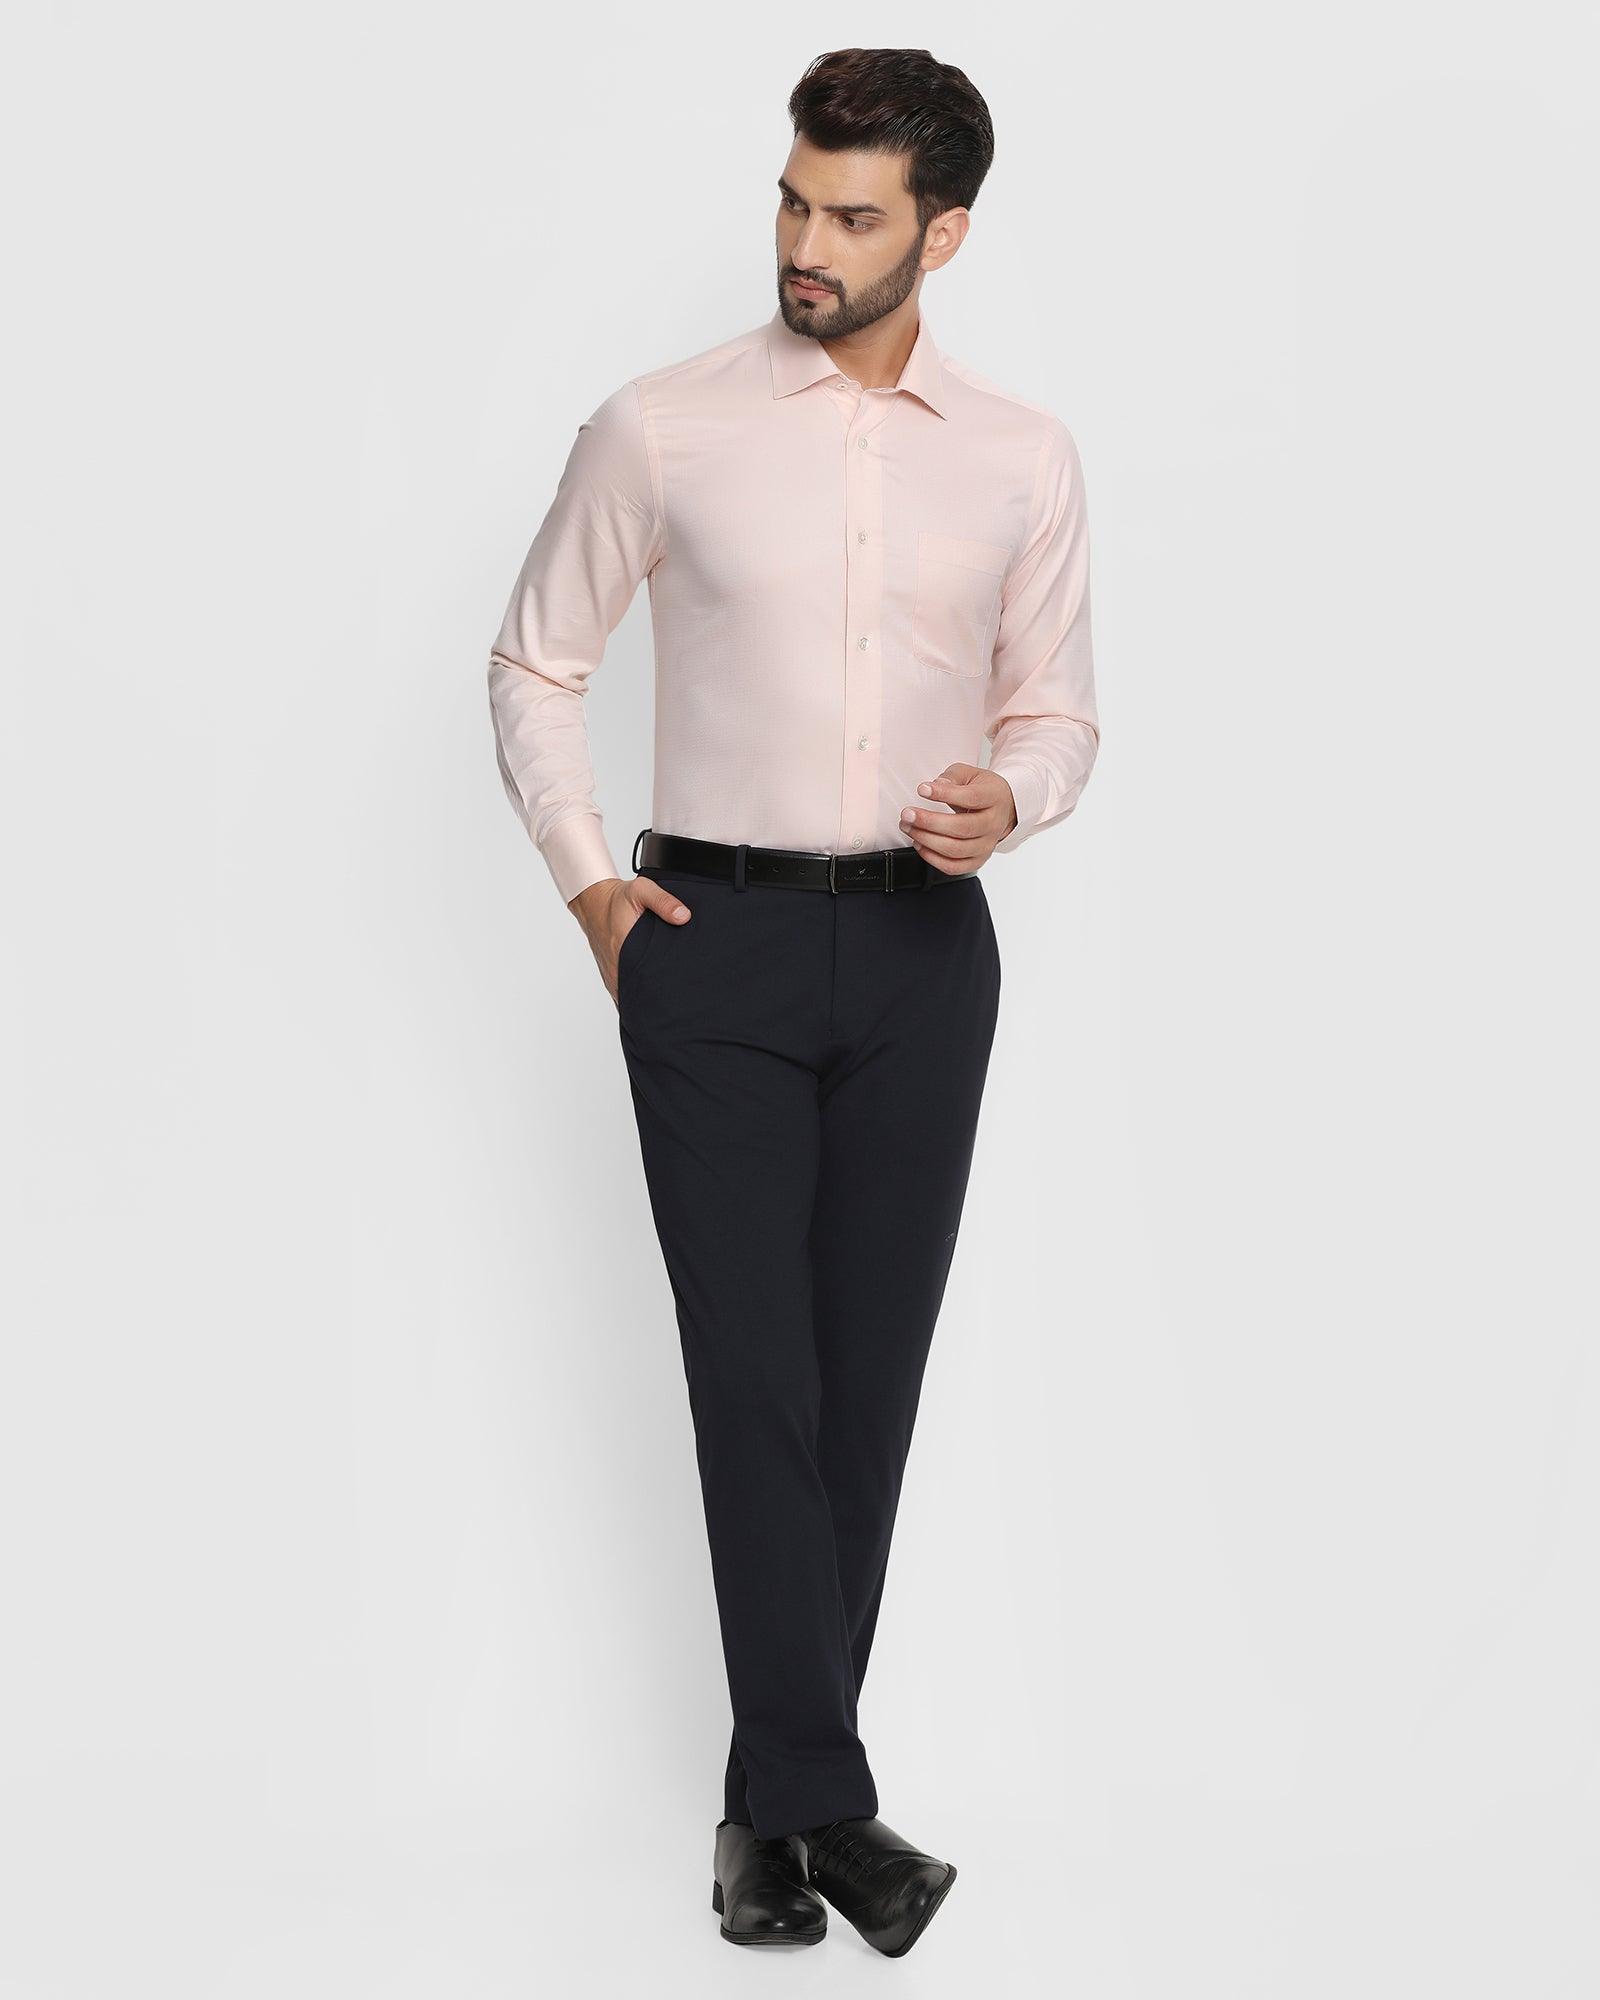 Woman in pink dress shirt and black pants standing near green plants during  daytime photo  Free Clothing Image on Unsplash